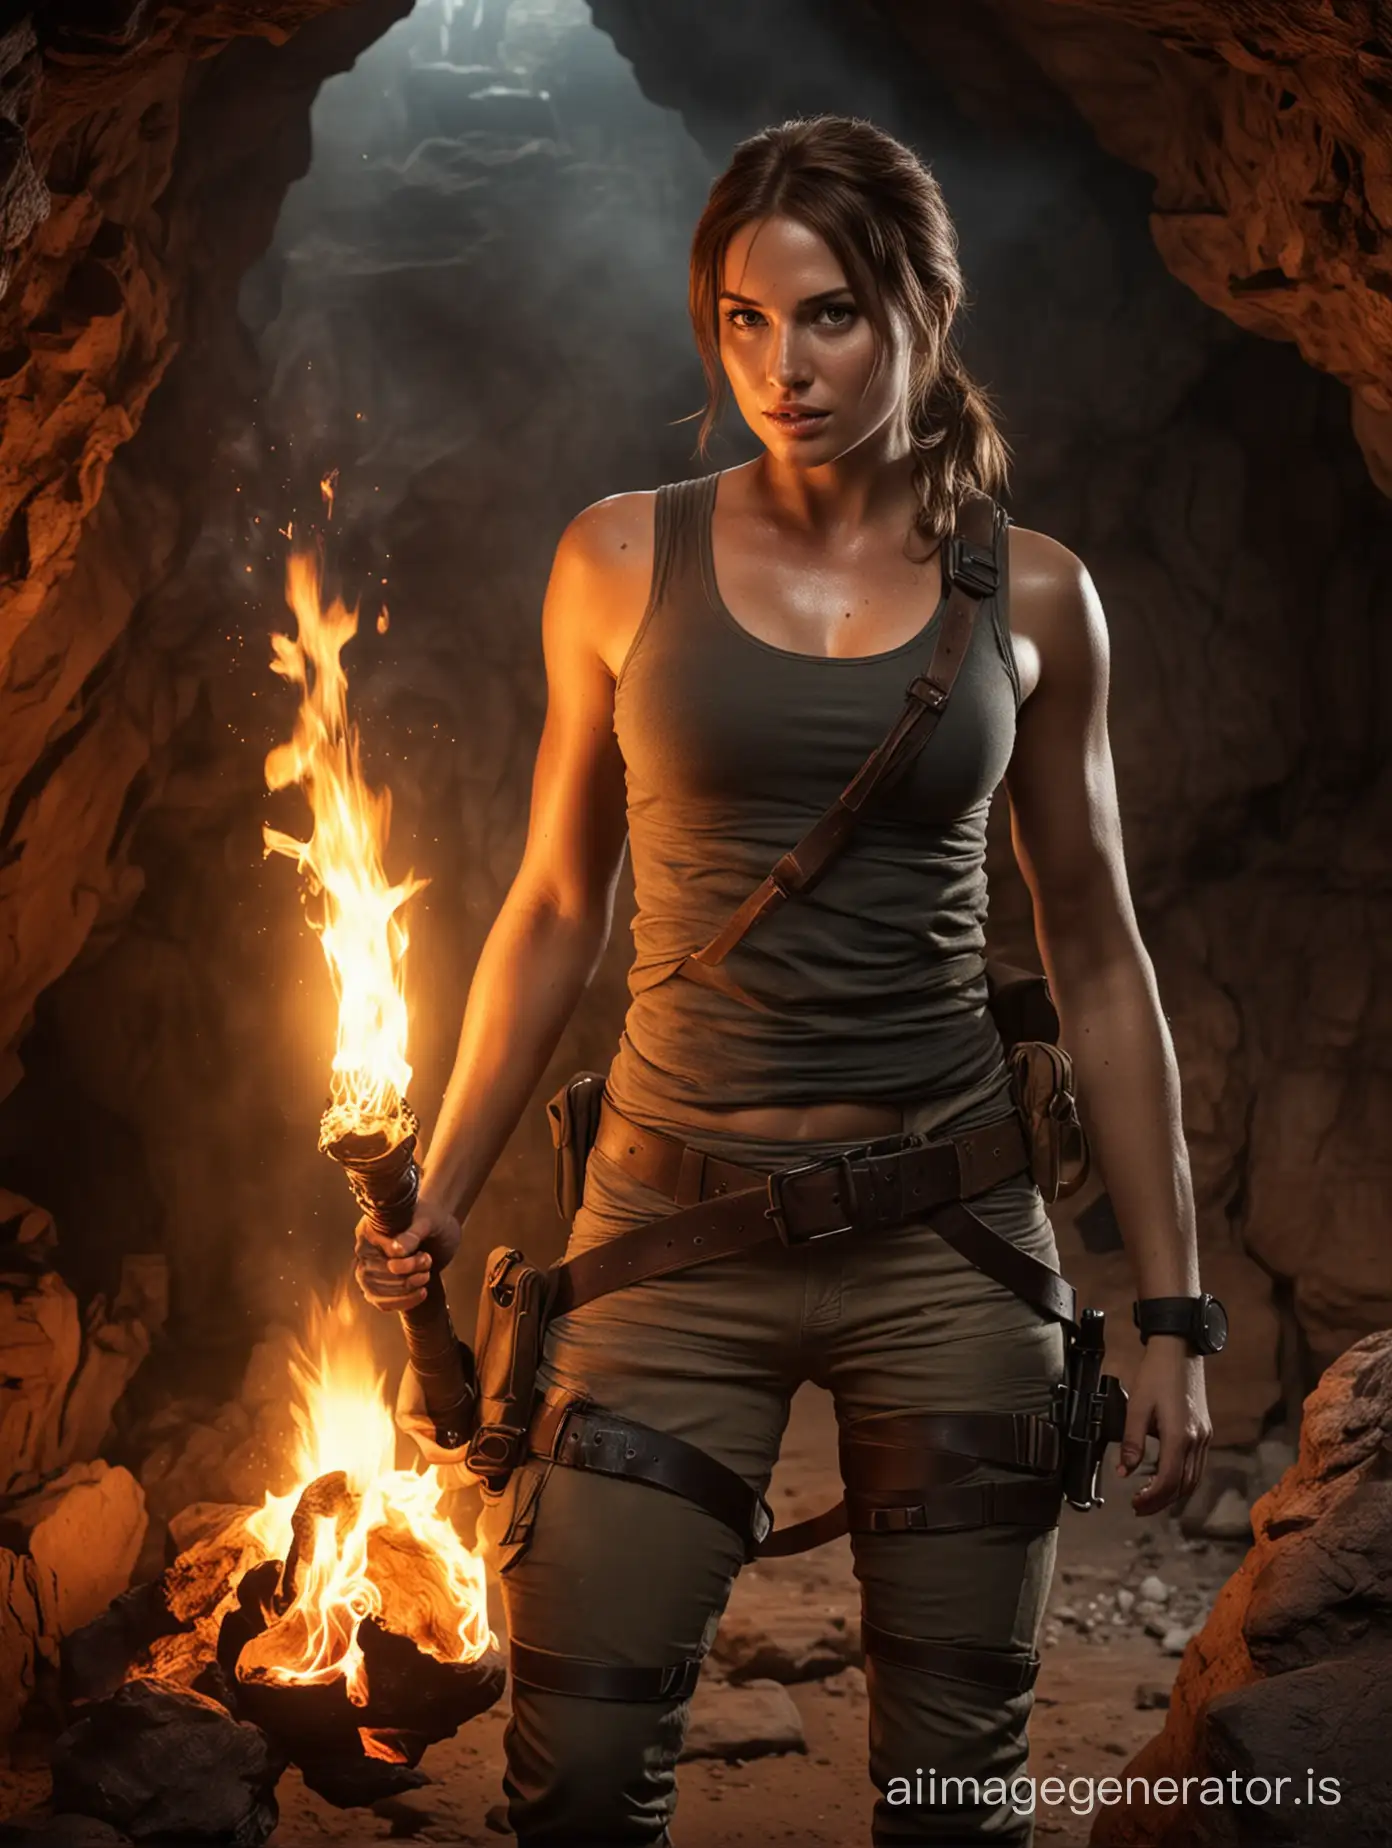 Anna de Armas as Lara Croft in a cave with fire, holding a flaming torch.